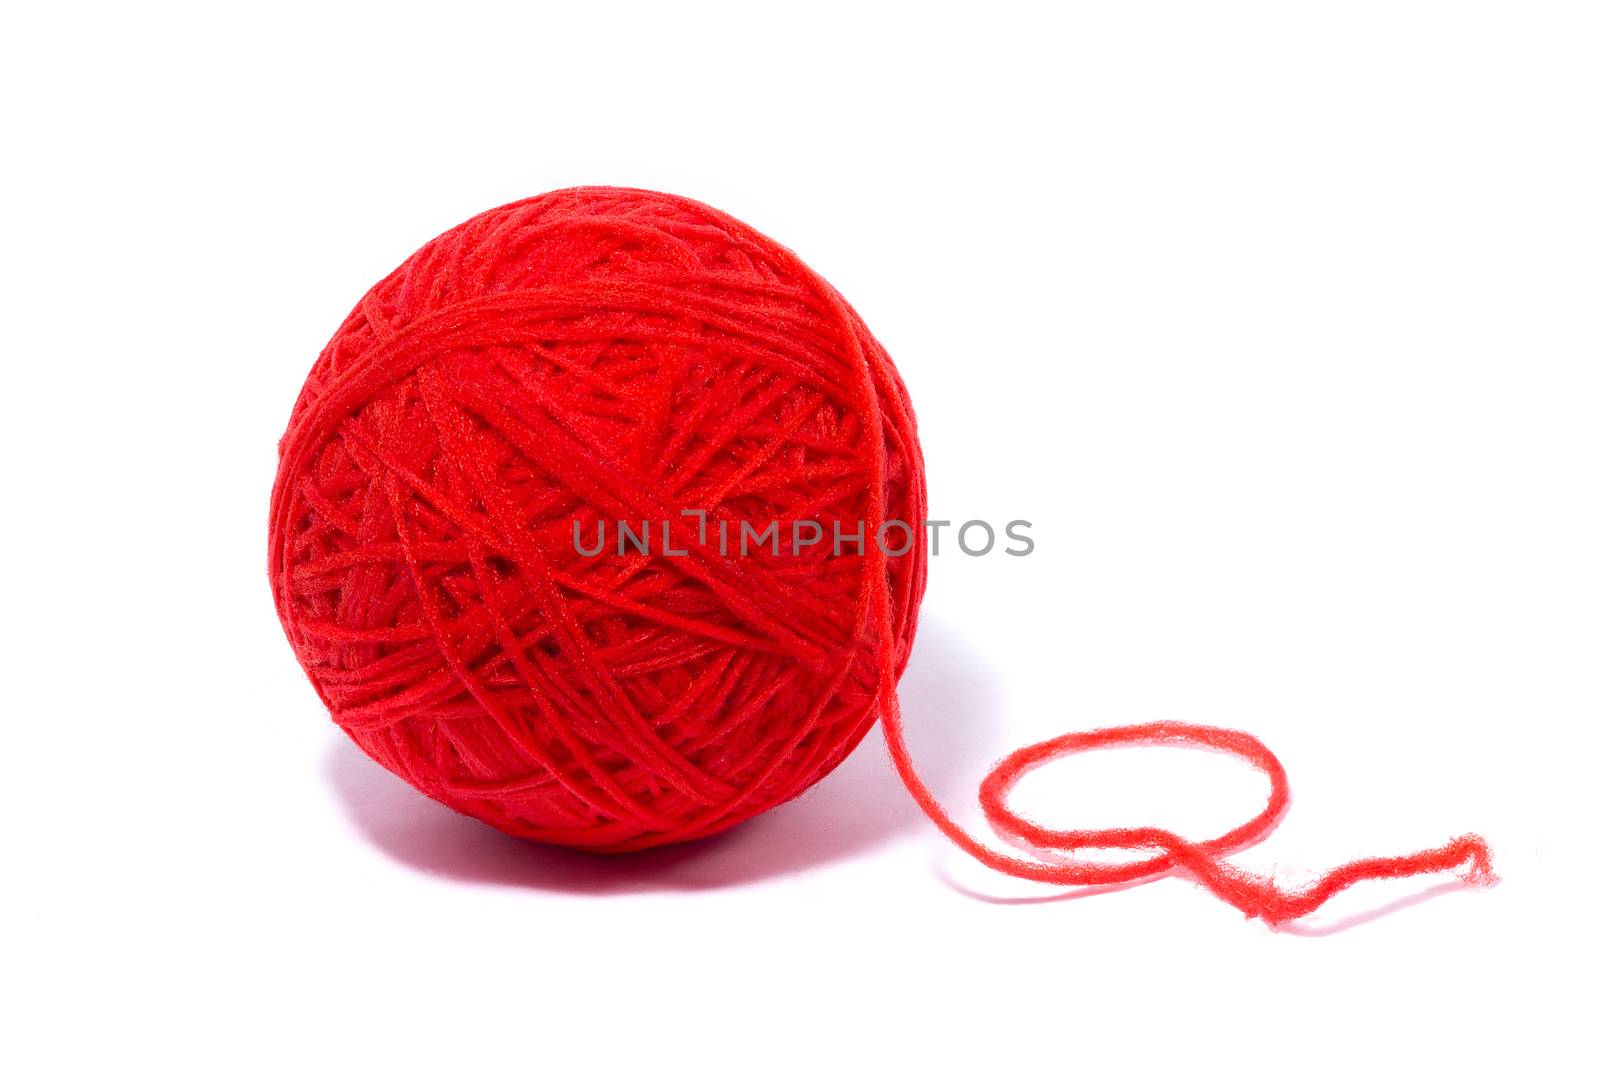 red ball of yarn for knitting, isolate, homemade crafts